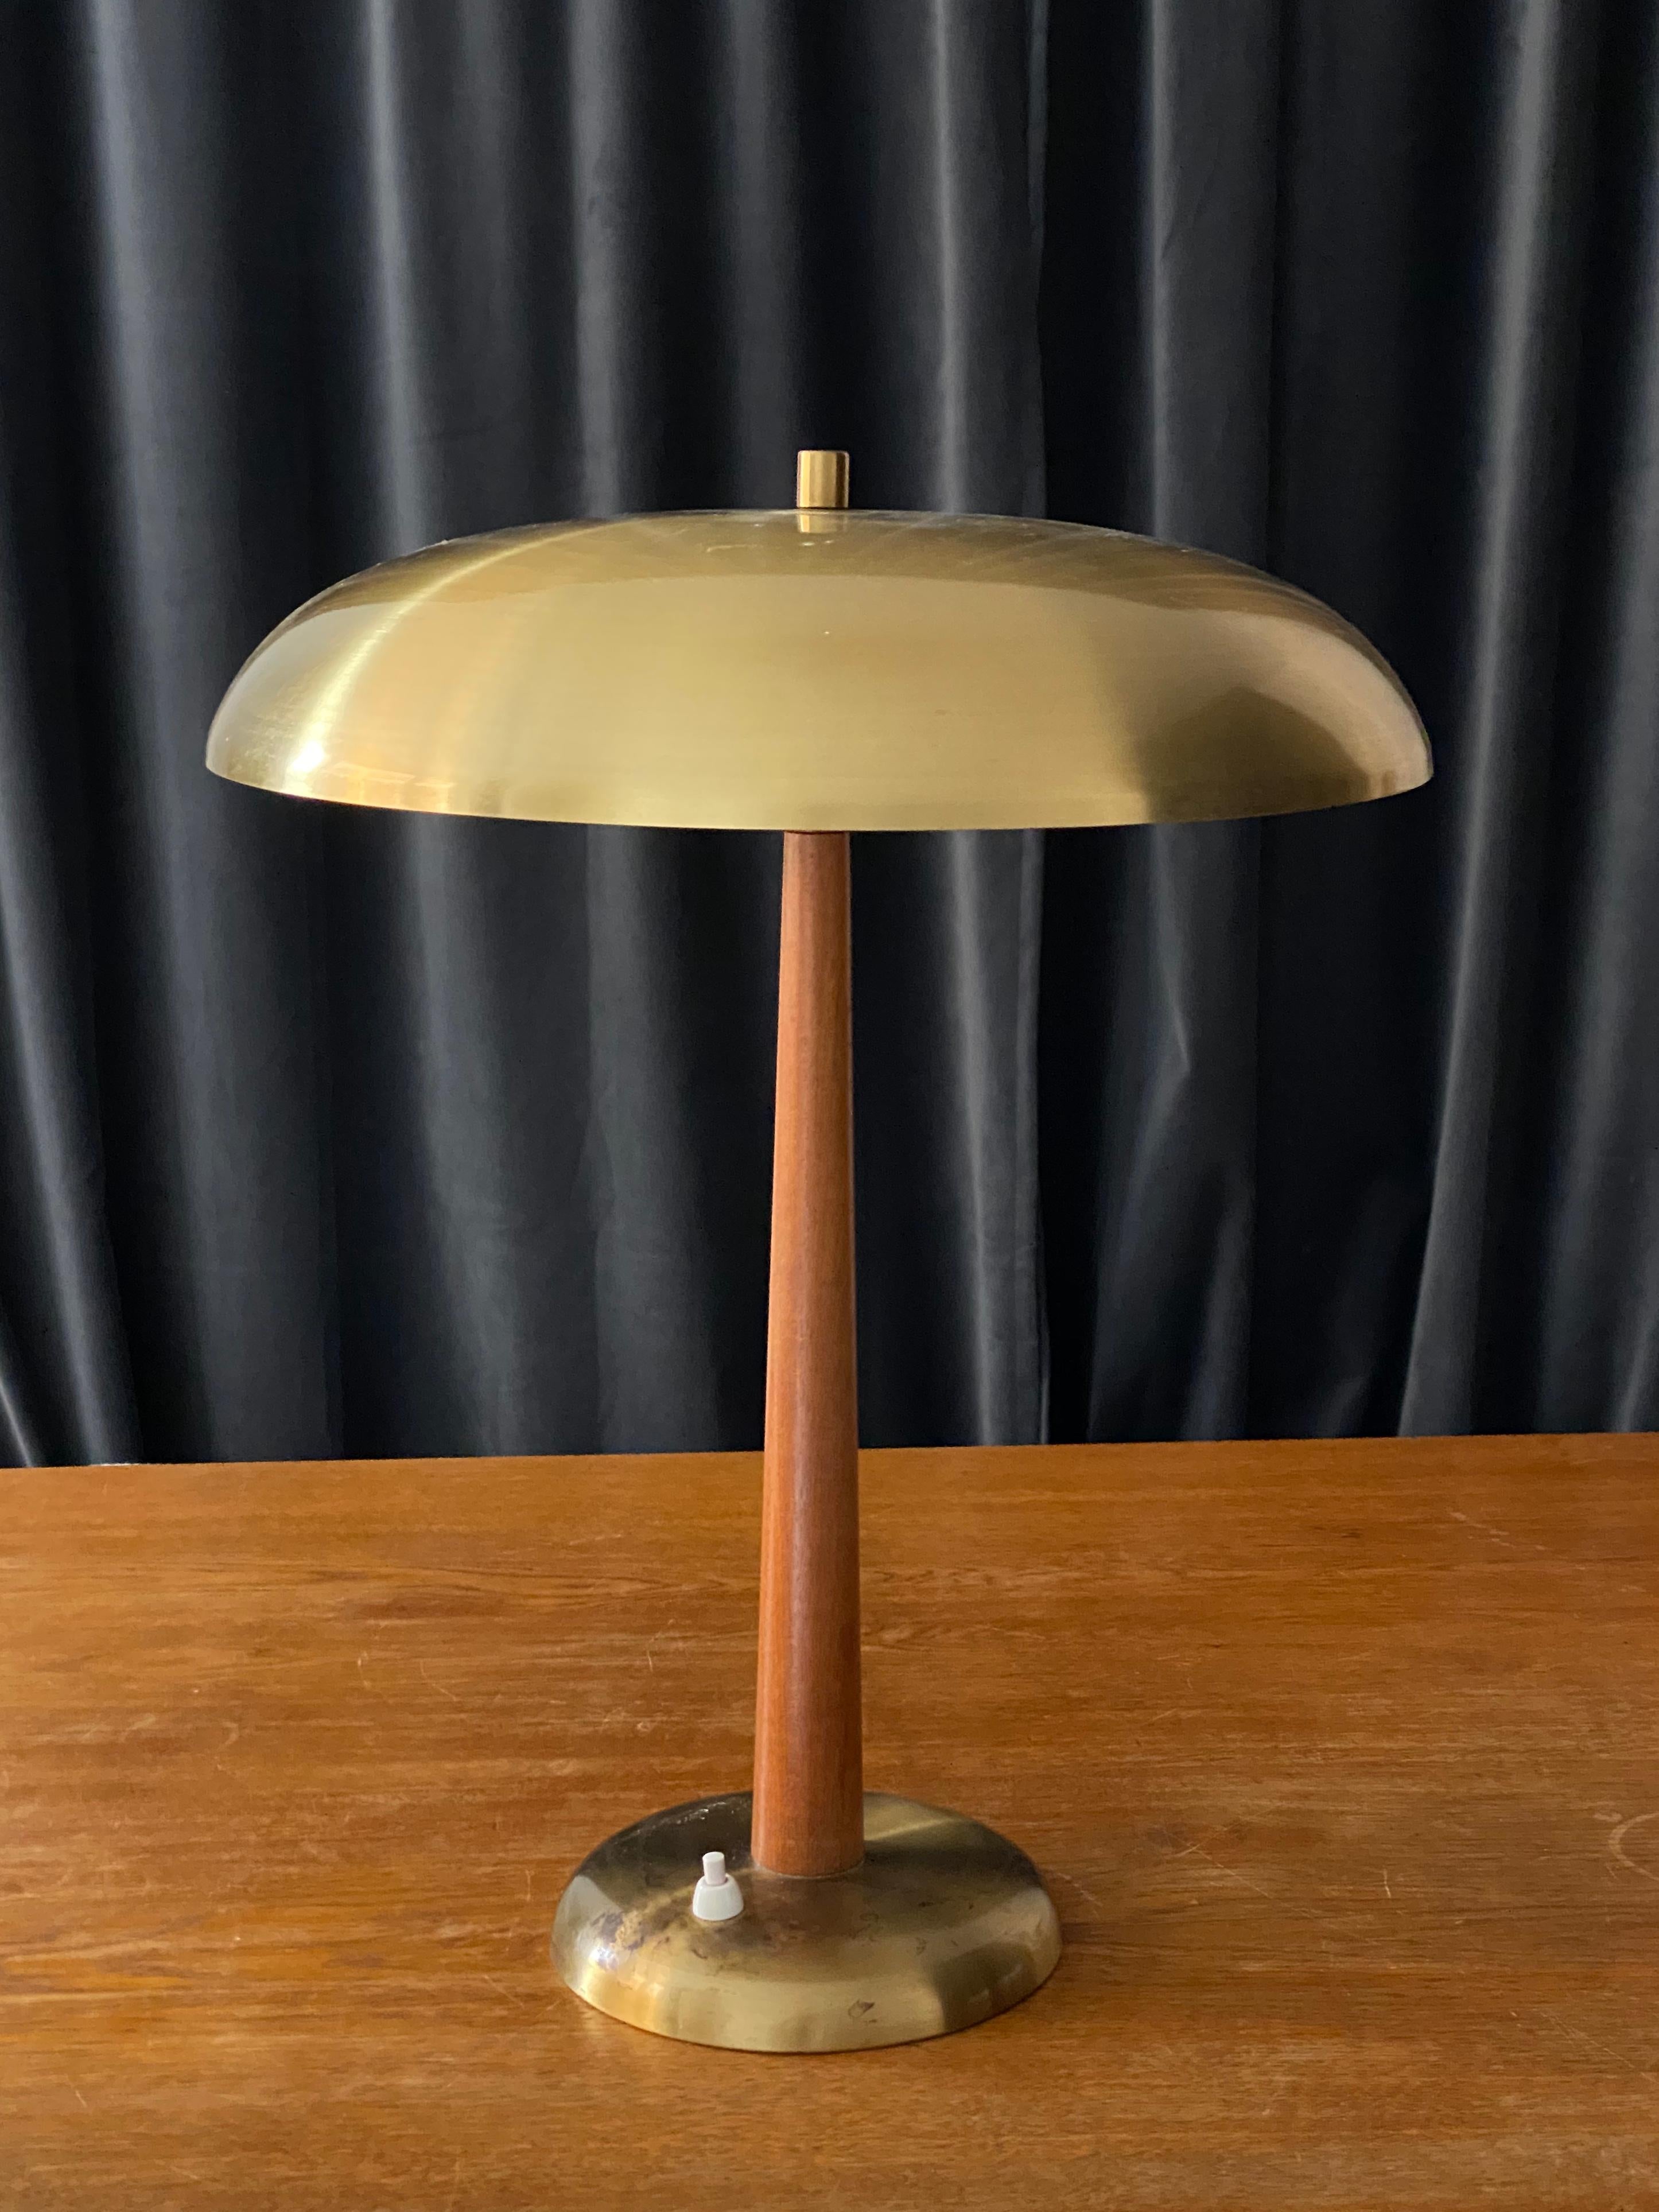 An early modernist table lamp. In brass and stained oak. Produced in Sweden, 1940s.

Other designers of the period include Paavo Tynell, Lisa Johansson-Pape, Carl-Axel Acking, and Gunnar Asplund.